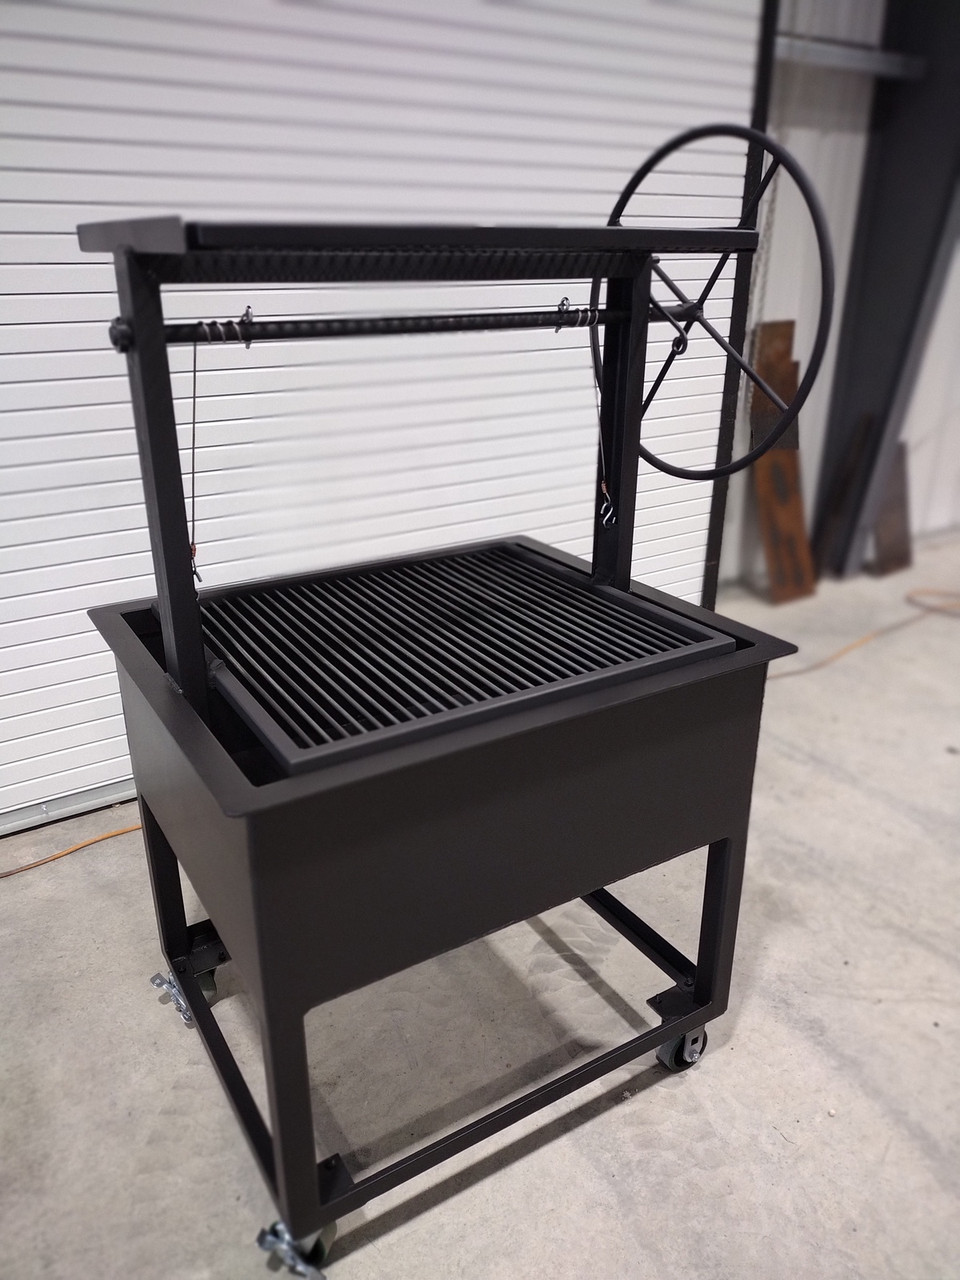 NorCal Ovenworks: Authentic Texas BBQ Pit Smoker for Your Backyard